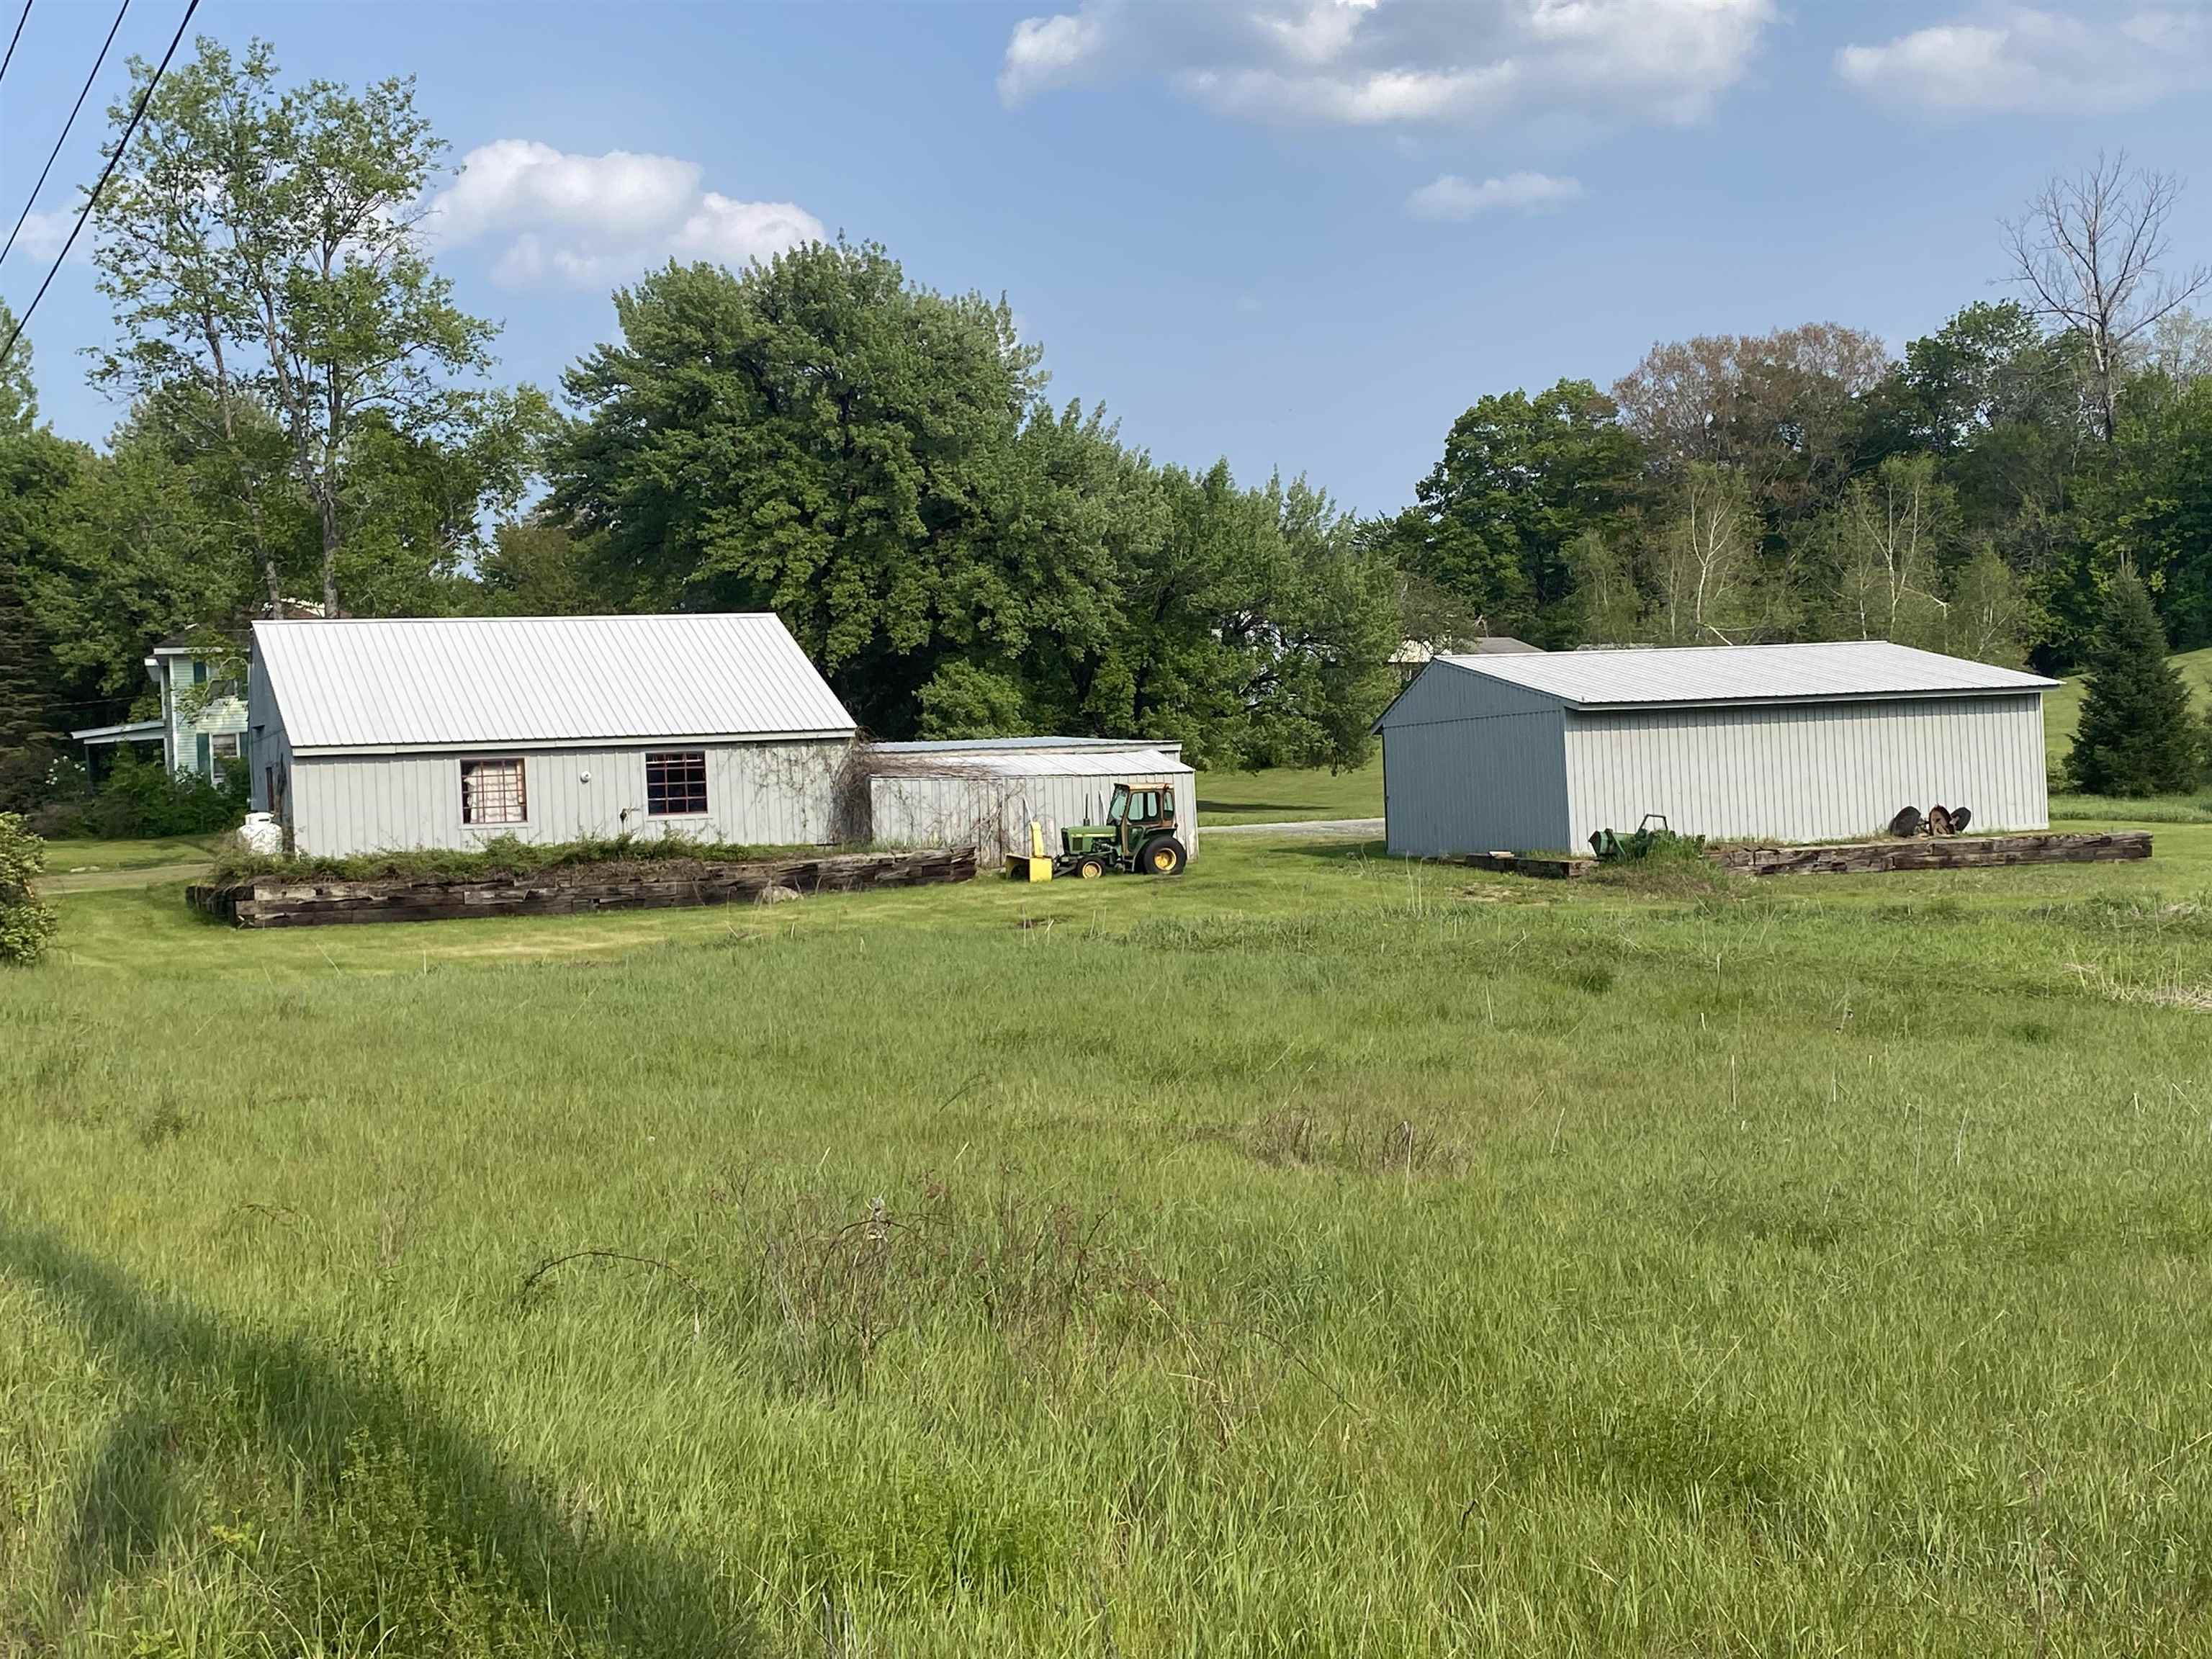 Showing the backside of both barns from one corner of the lot.  Nice field for horses!